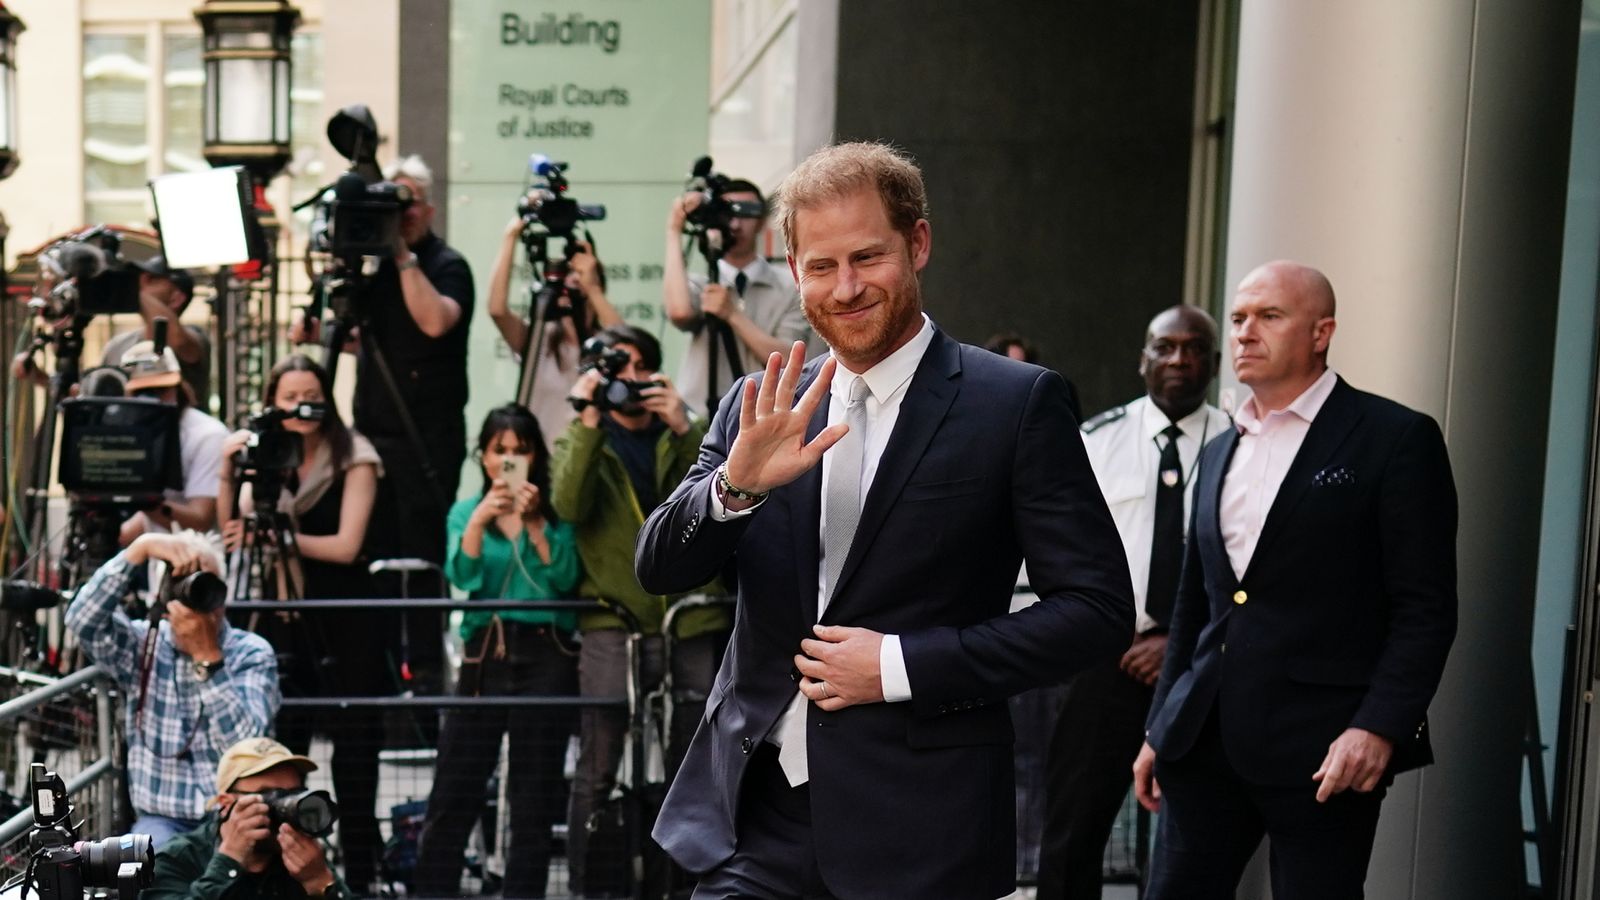 No matter how this trial goes, this won't be the last we hear of Prince Harry | Adam Boulton